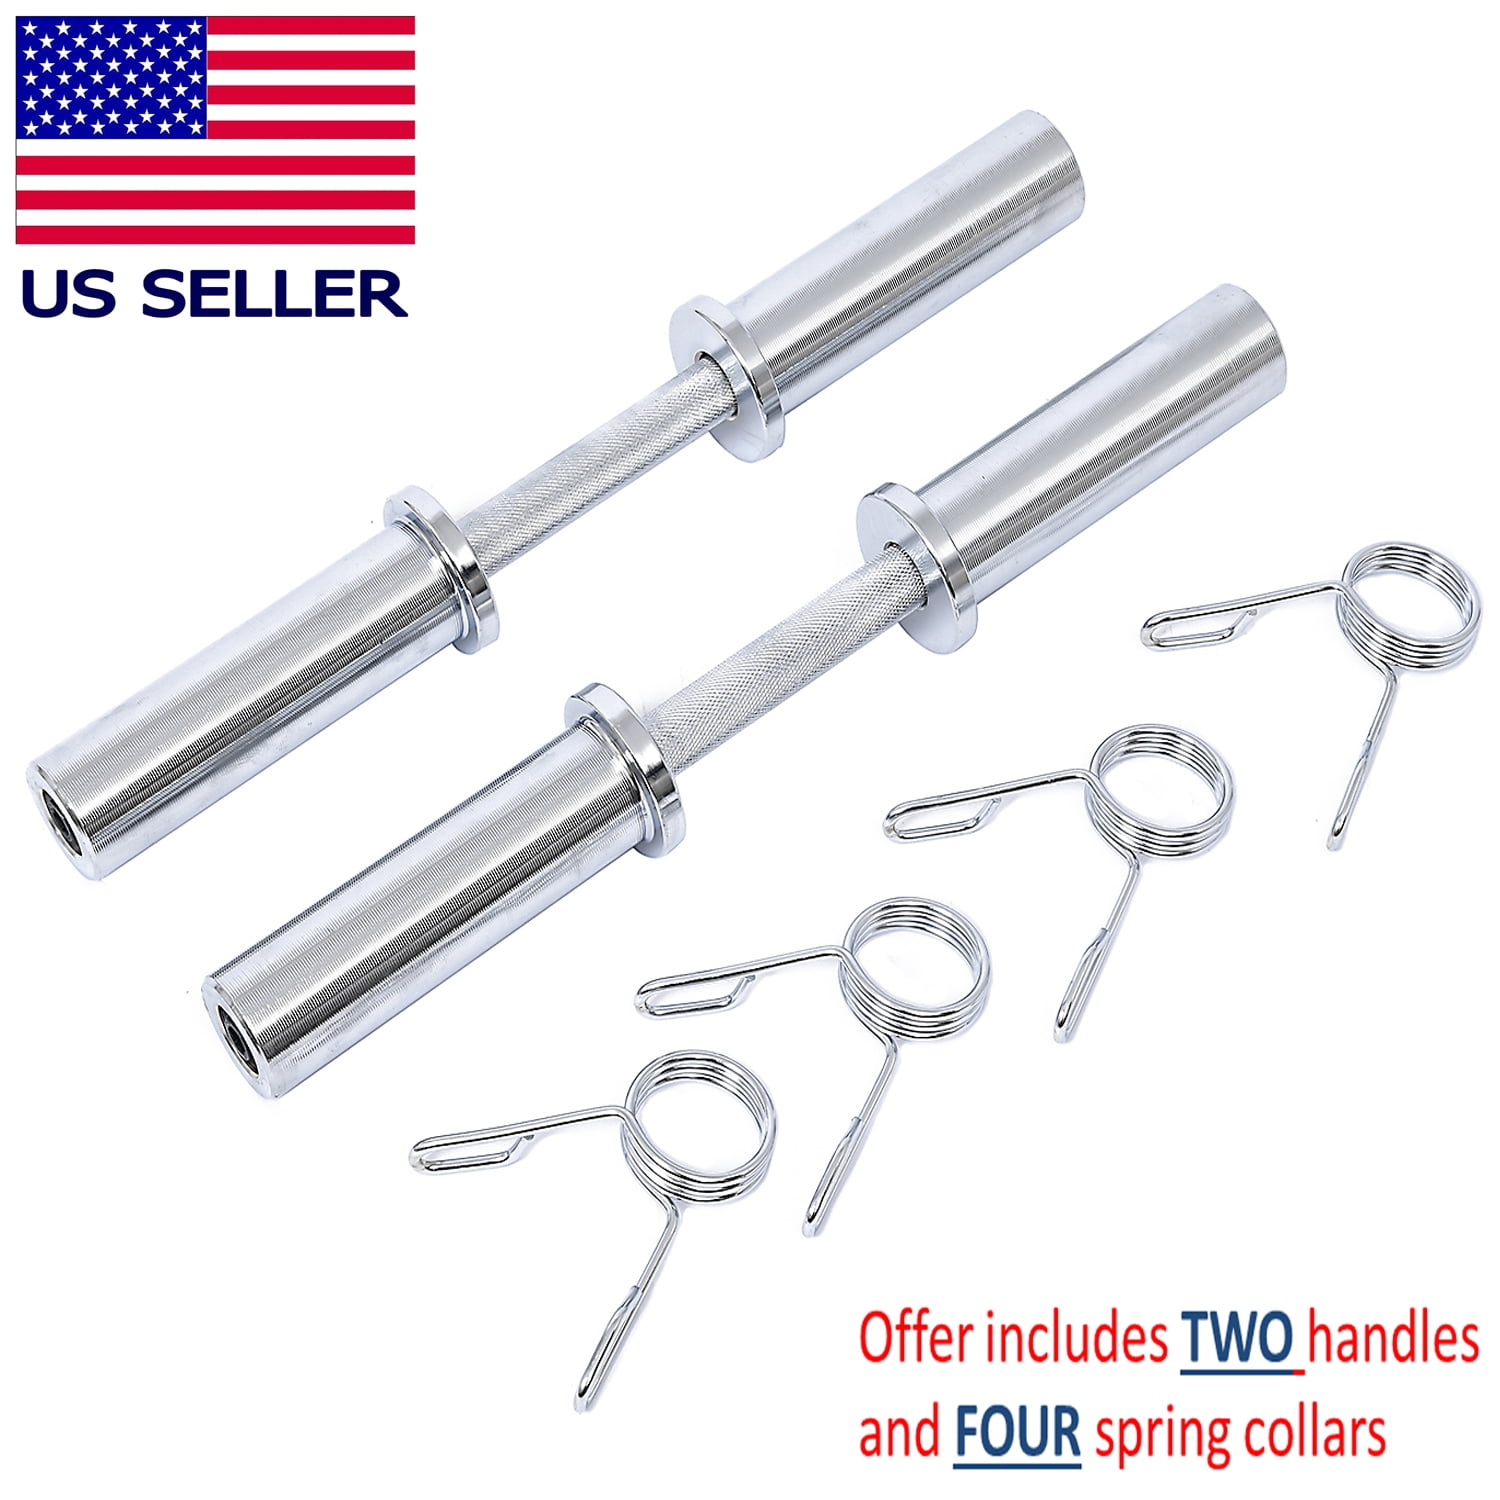 2 *NEW SEALED* IN HAND* TWO CAP Barbell Solid 20-Inch Olympic Dumbell Handles 